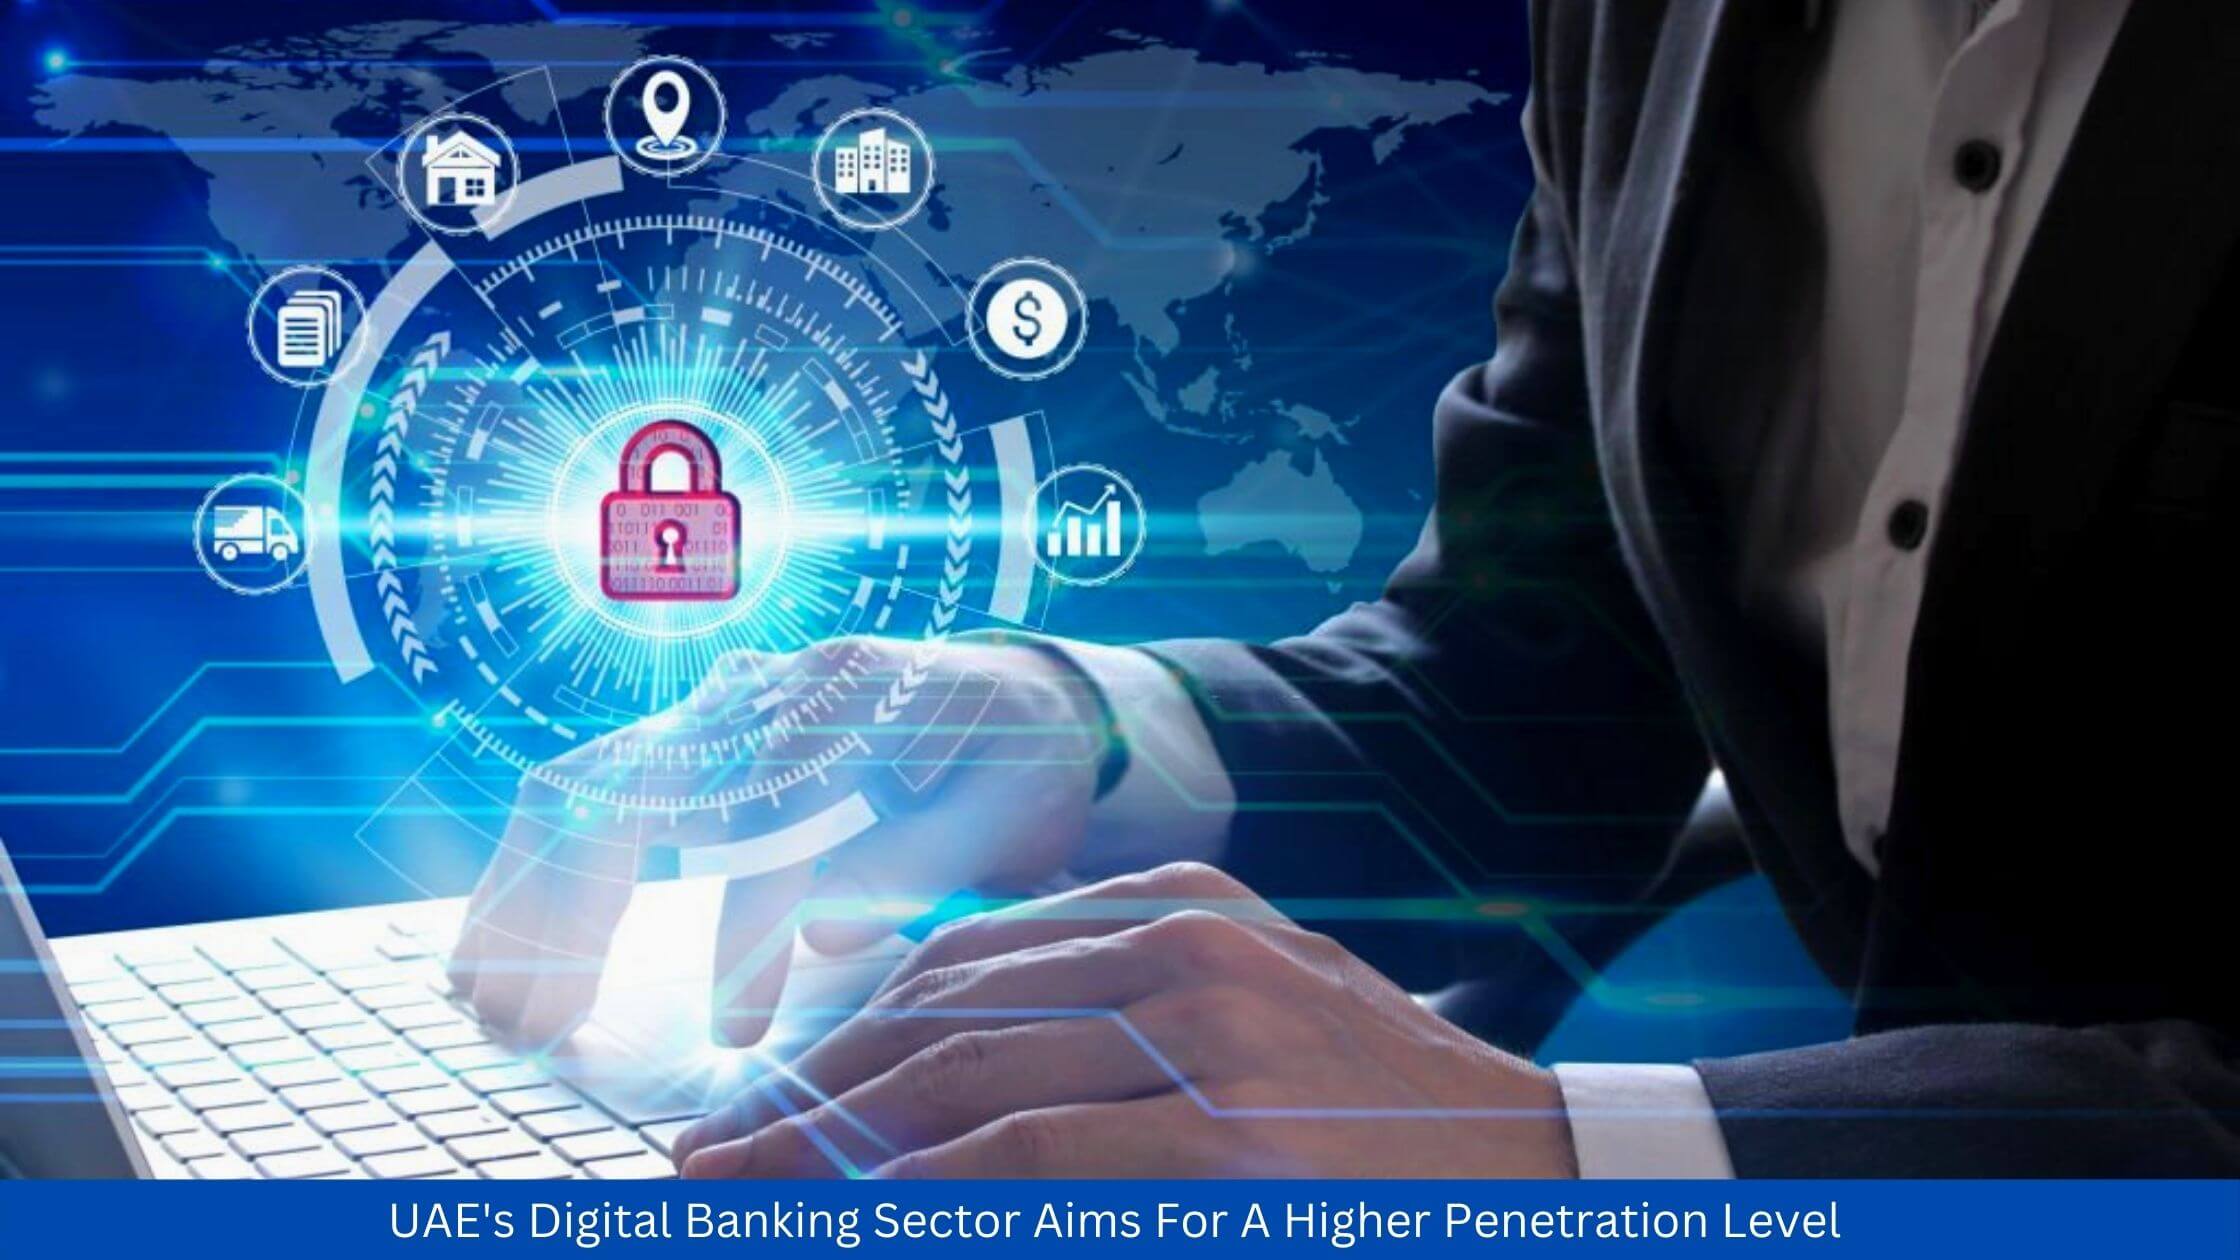 UAE's Digital Banking Sector Aims For A Higher Penetration Level